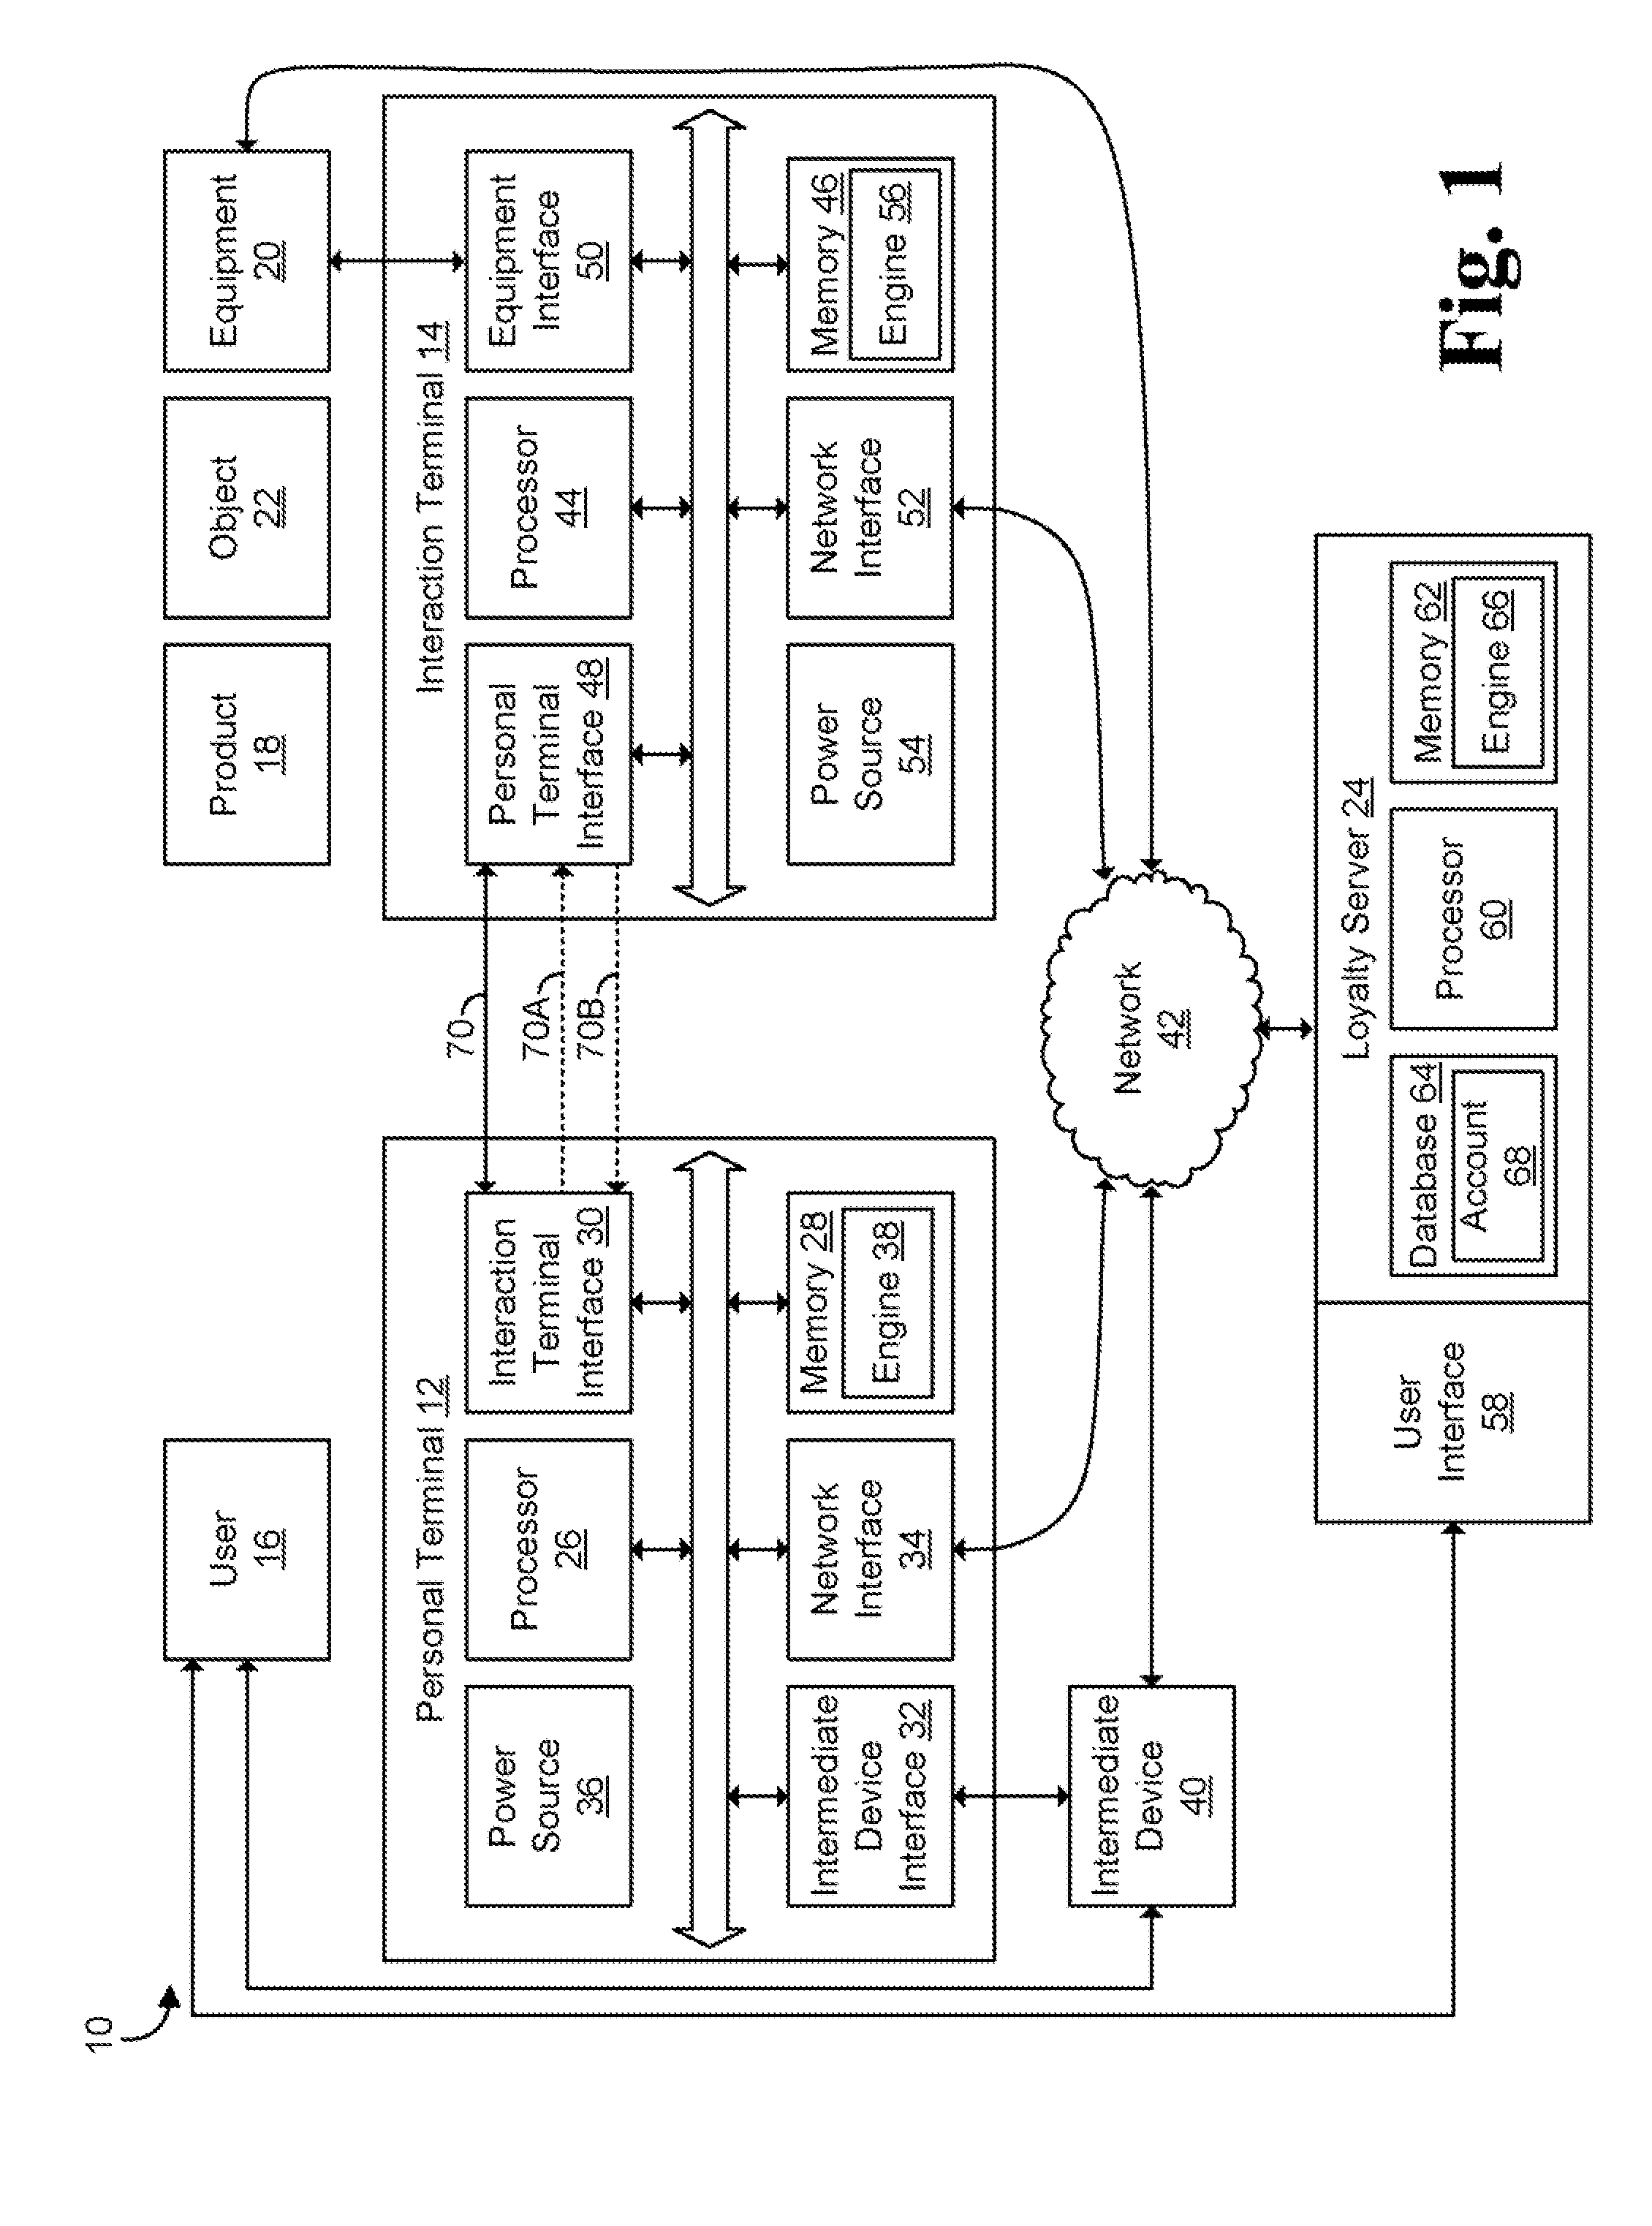 Systems and Methods for Providing a Personal Terminal for a Loyalty Program